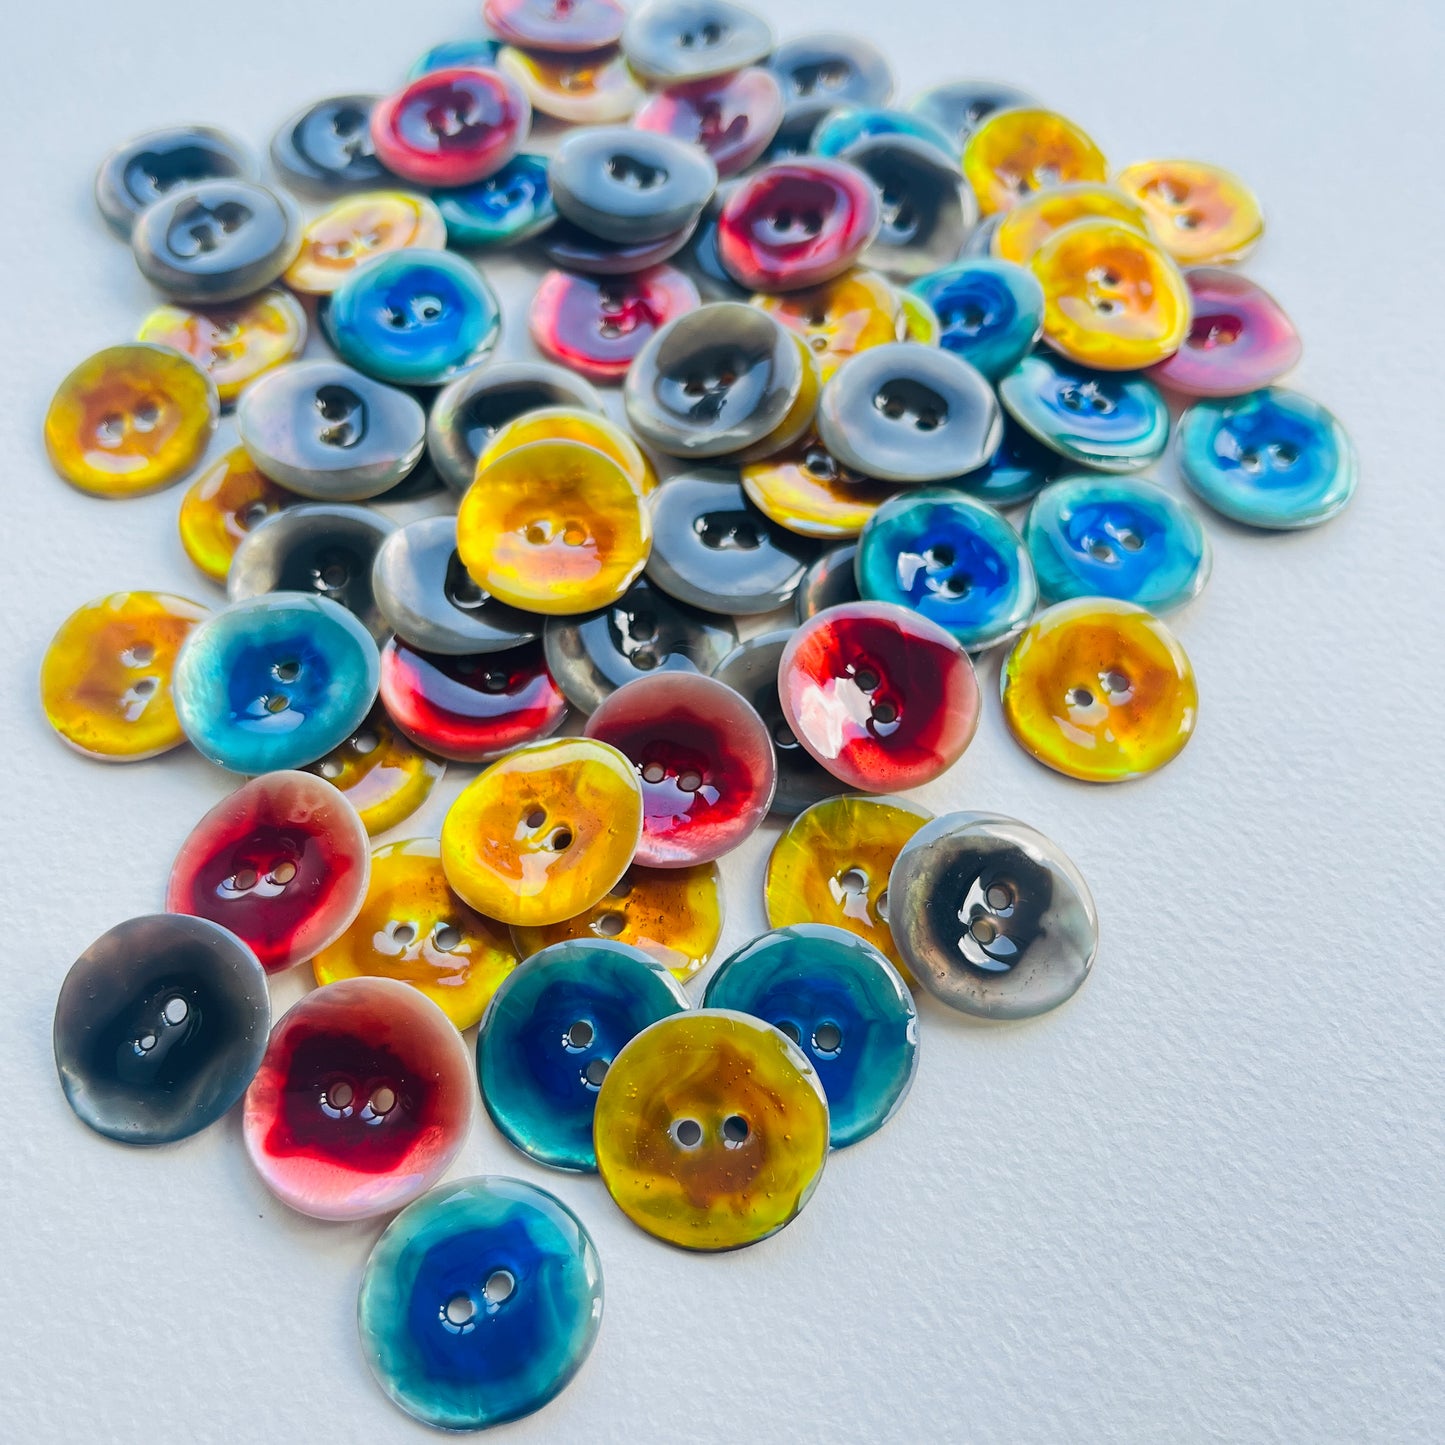 Colourful lacquered Agoya shell buttons - 23mm/36 ligne .Deadstock haberdashery. Choose our range of vintage buttons, trims & sewing accoutrement rescued from a London haberdasher. Sew sustainably.